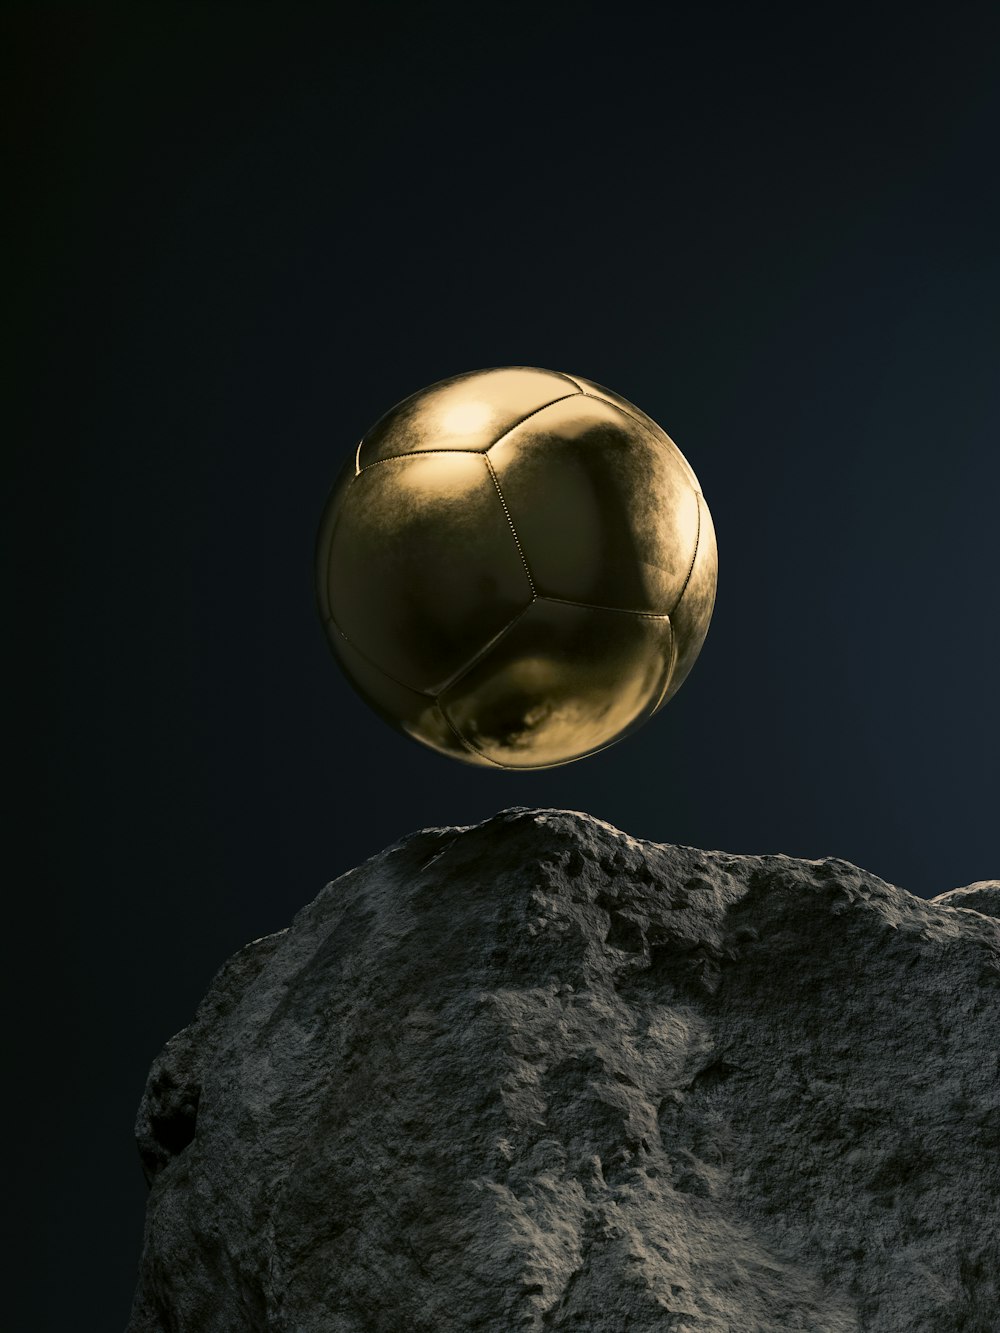 a golden soccer ball sitting on top of a rock